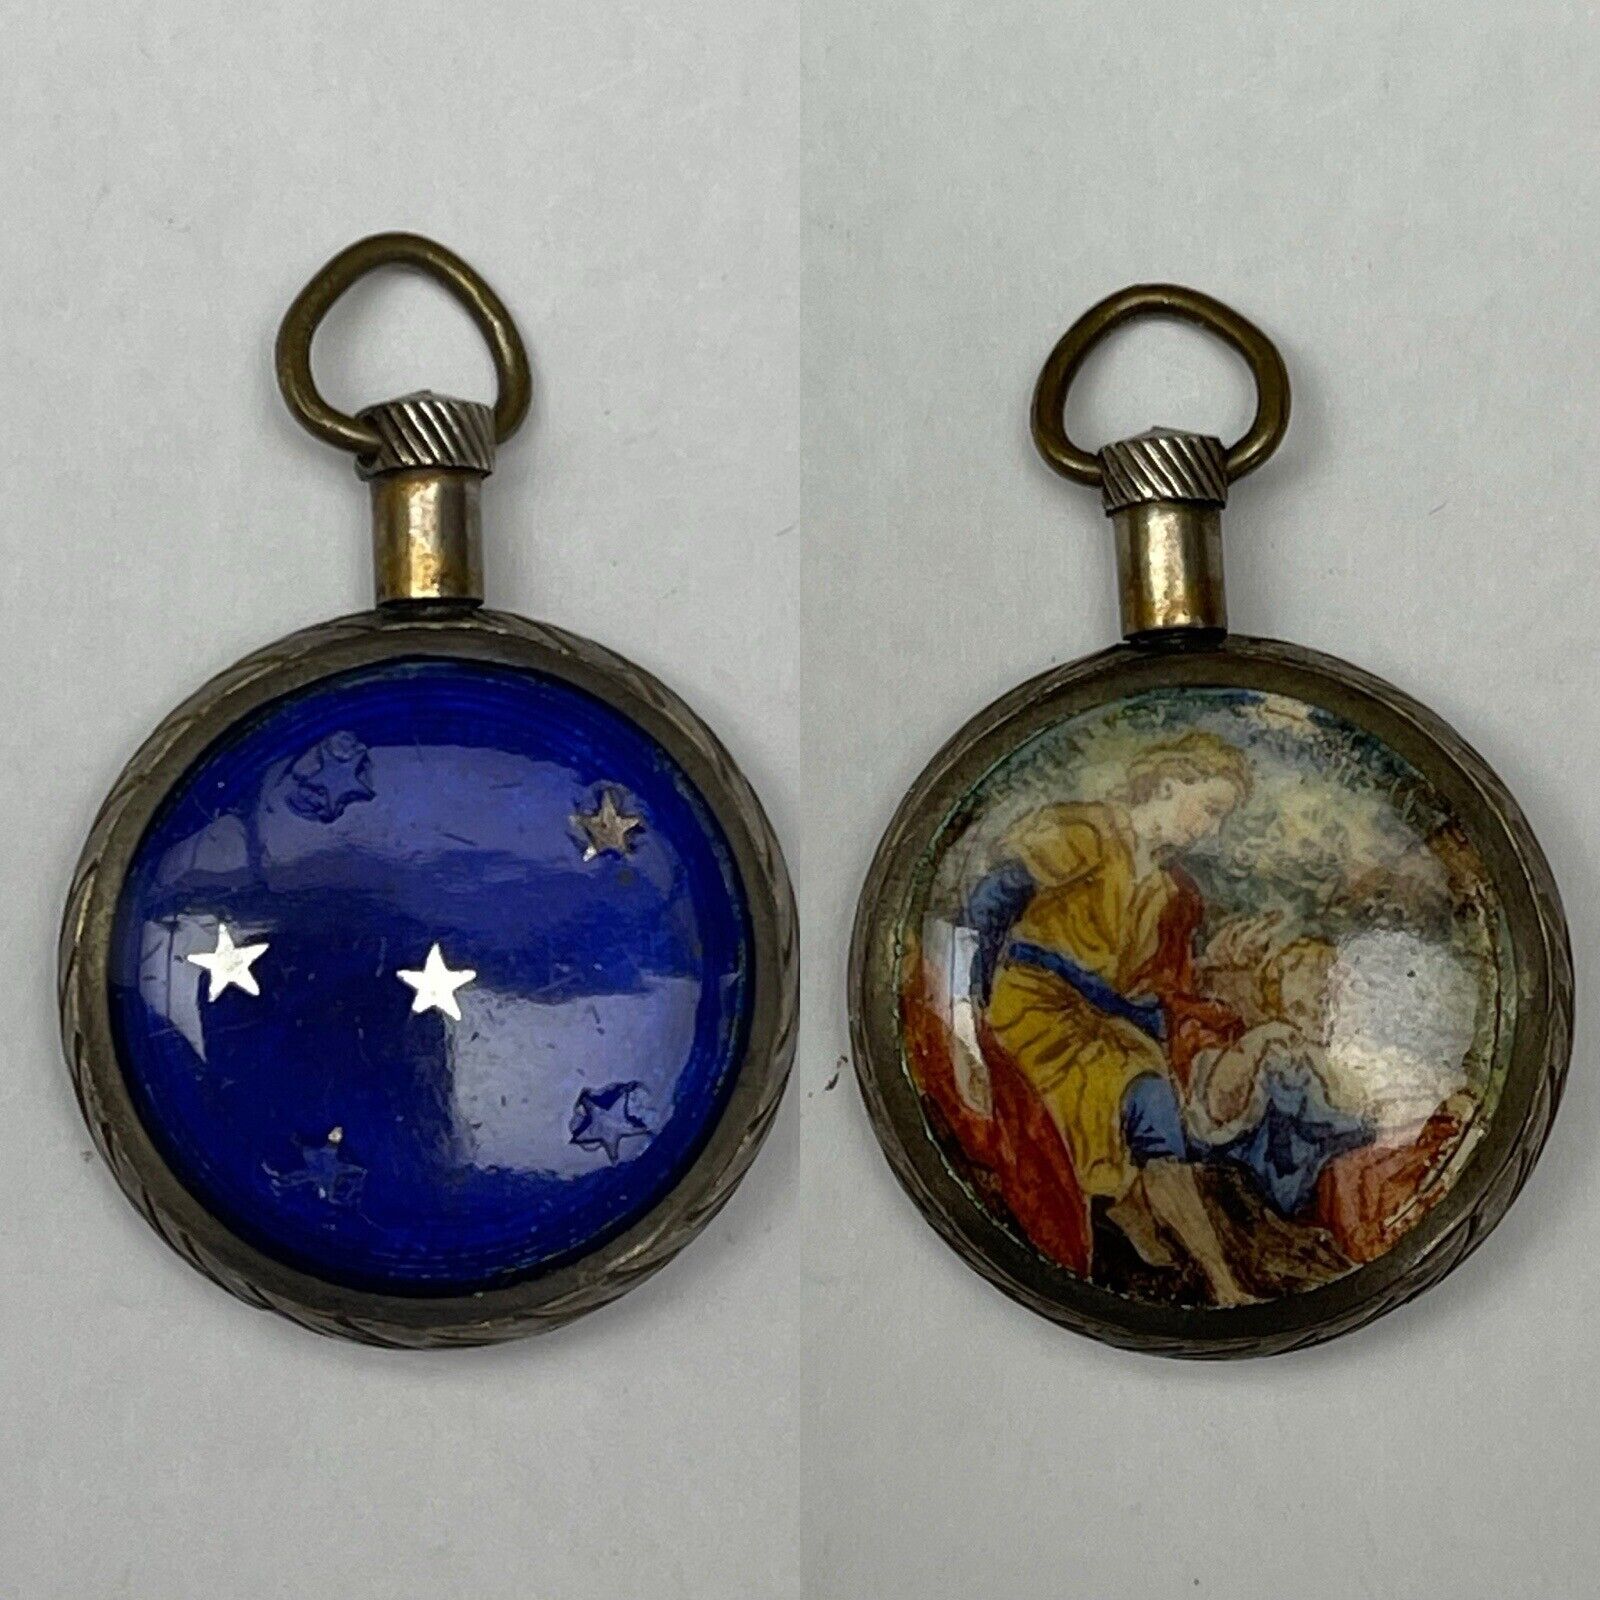 Antique Double Sided Perfume (?) Pendant Enamel & Painting 1” Silver With Brass